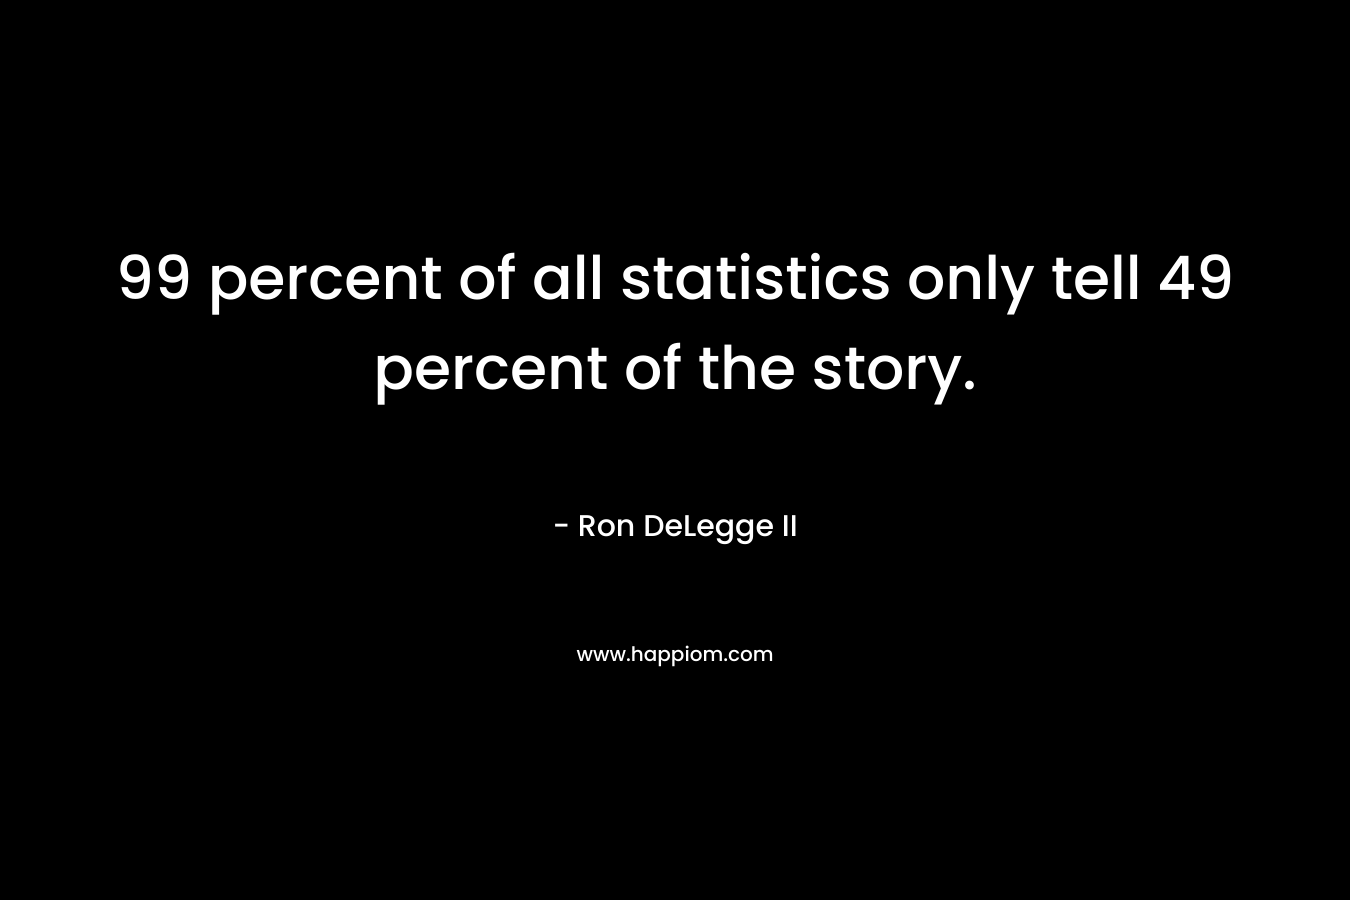 99 percent of all statistics only tell 49 percent of the story. – Ron DeLegge II